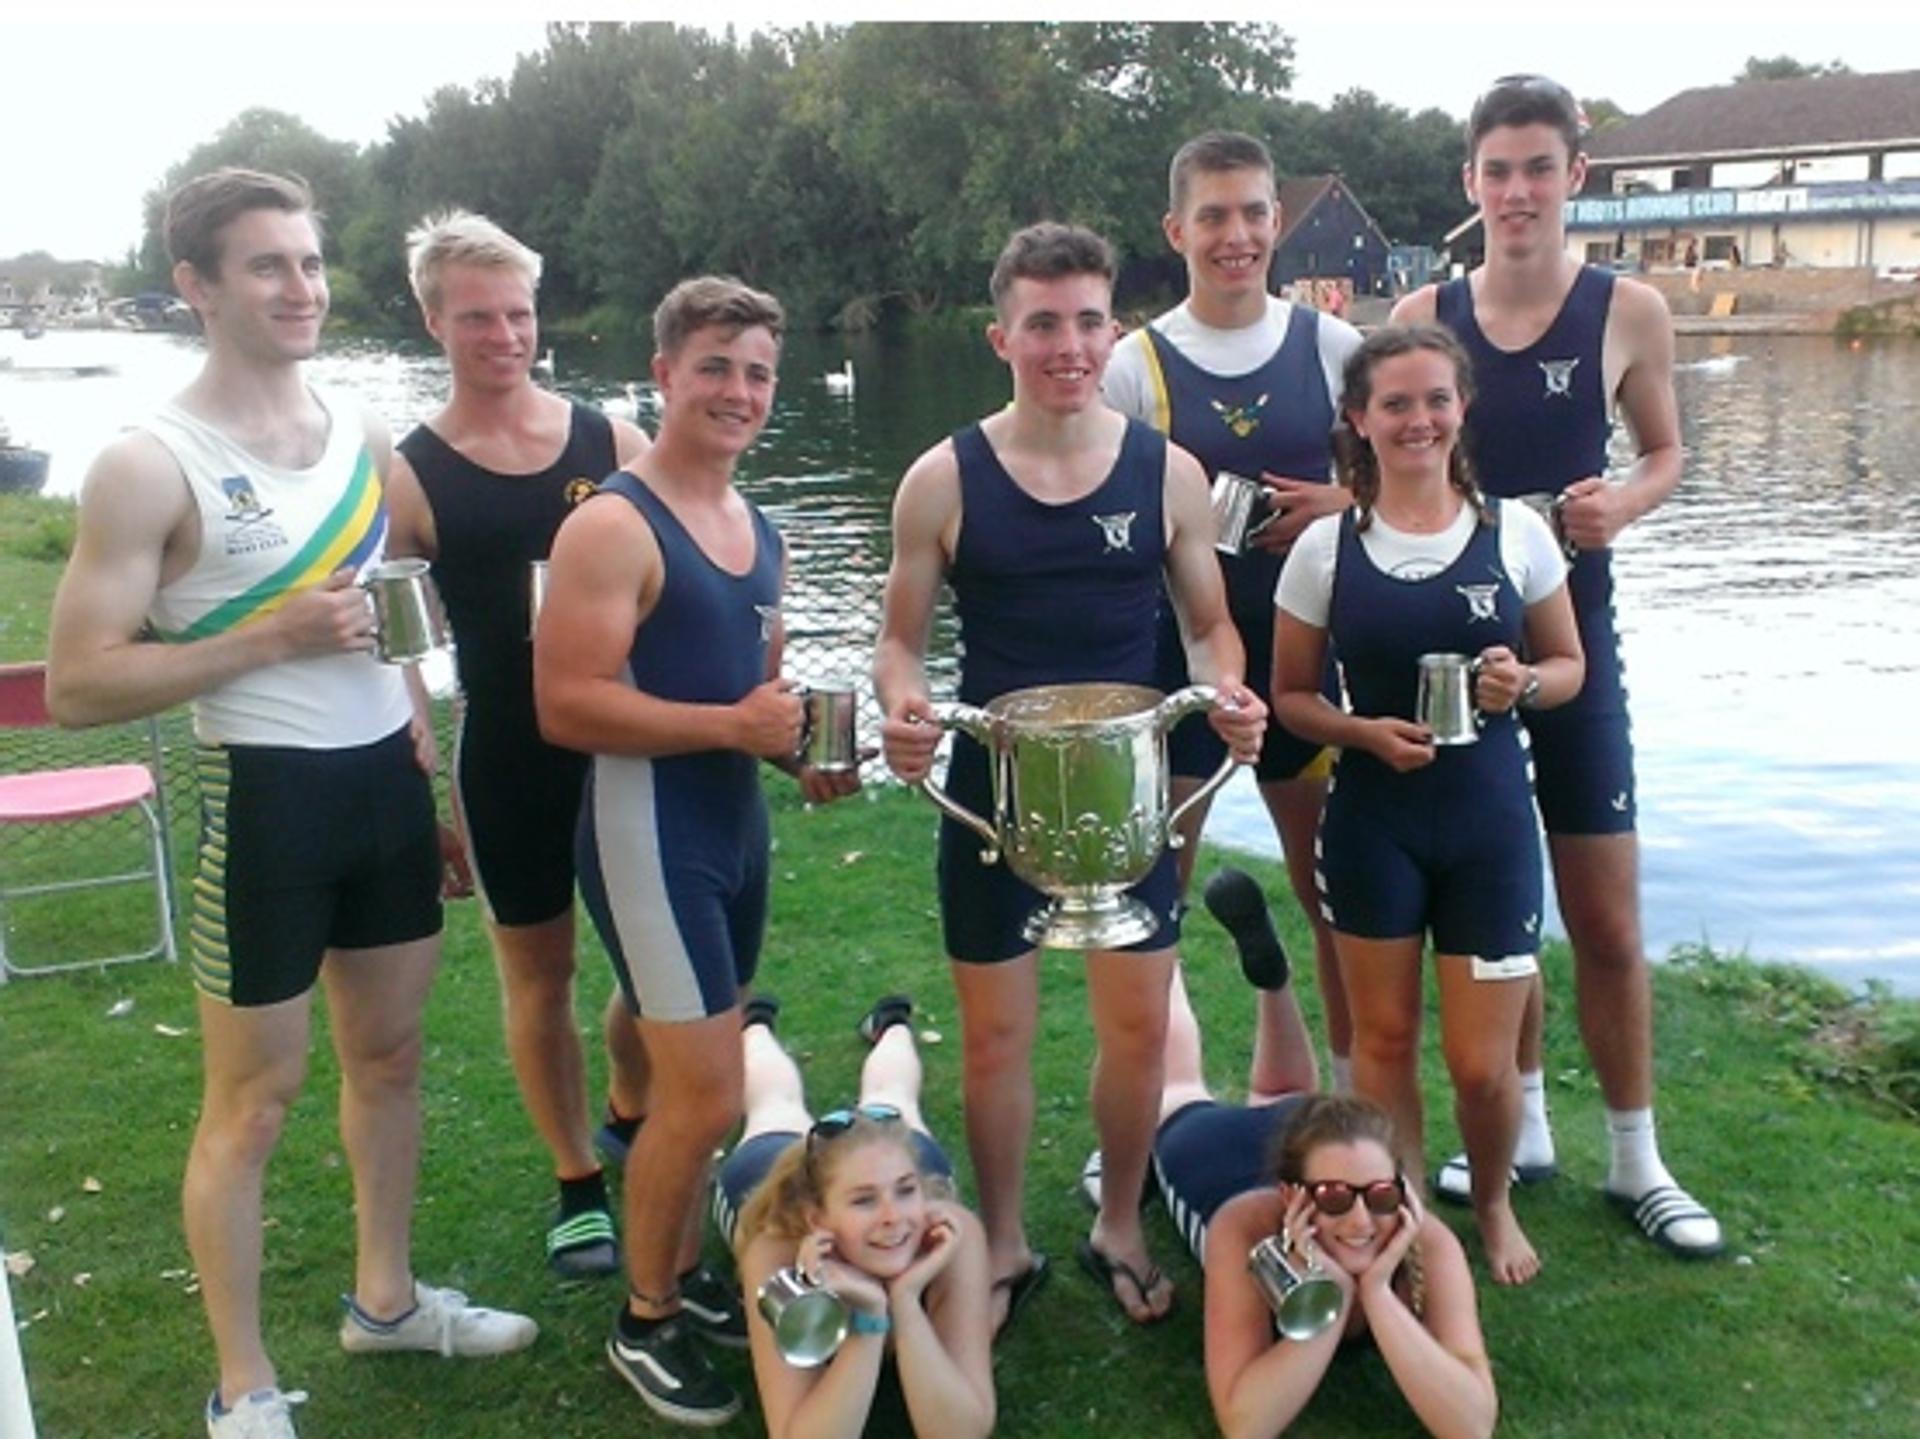 Mark Hughes, Tom Horton, George Jackson, Tom Bowles, Kieron Dibley, Callum Power, Molly Shaw, Amy Bowles and Holly Adams (cox) – winners of the men’s eight event at St. Neots Regatta.